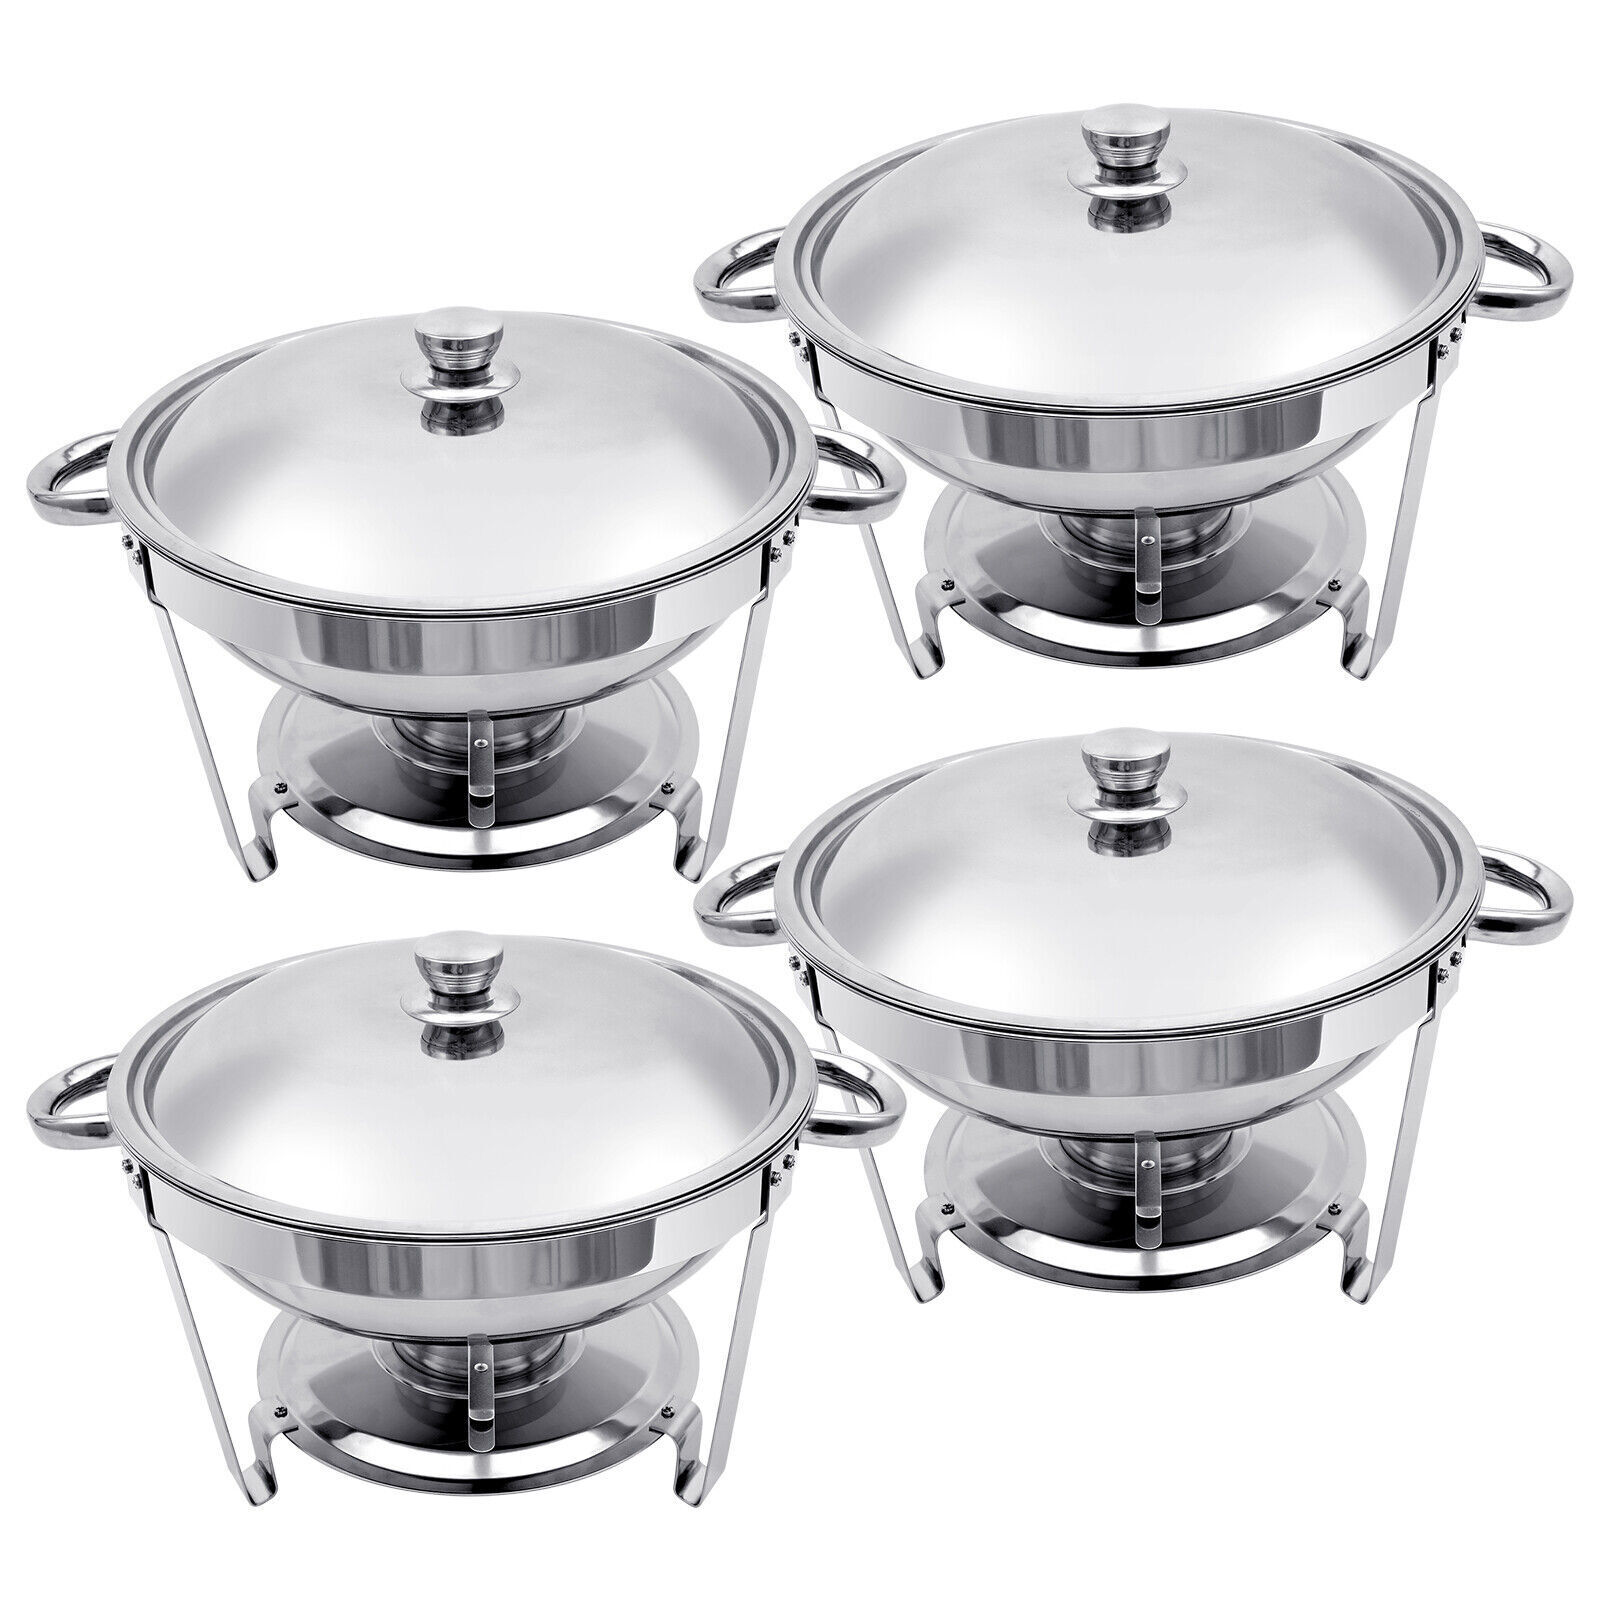 8 QT Round Stainless Steel Chafer Chafing Dish Sets Catering Food Warmer 4PACK